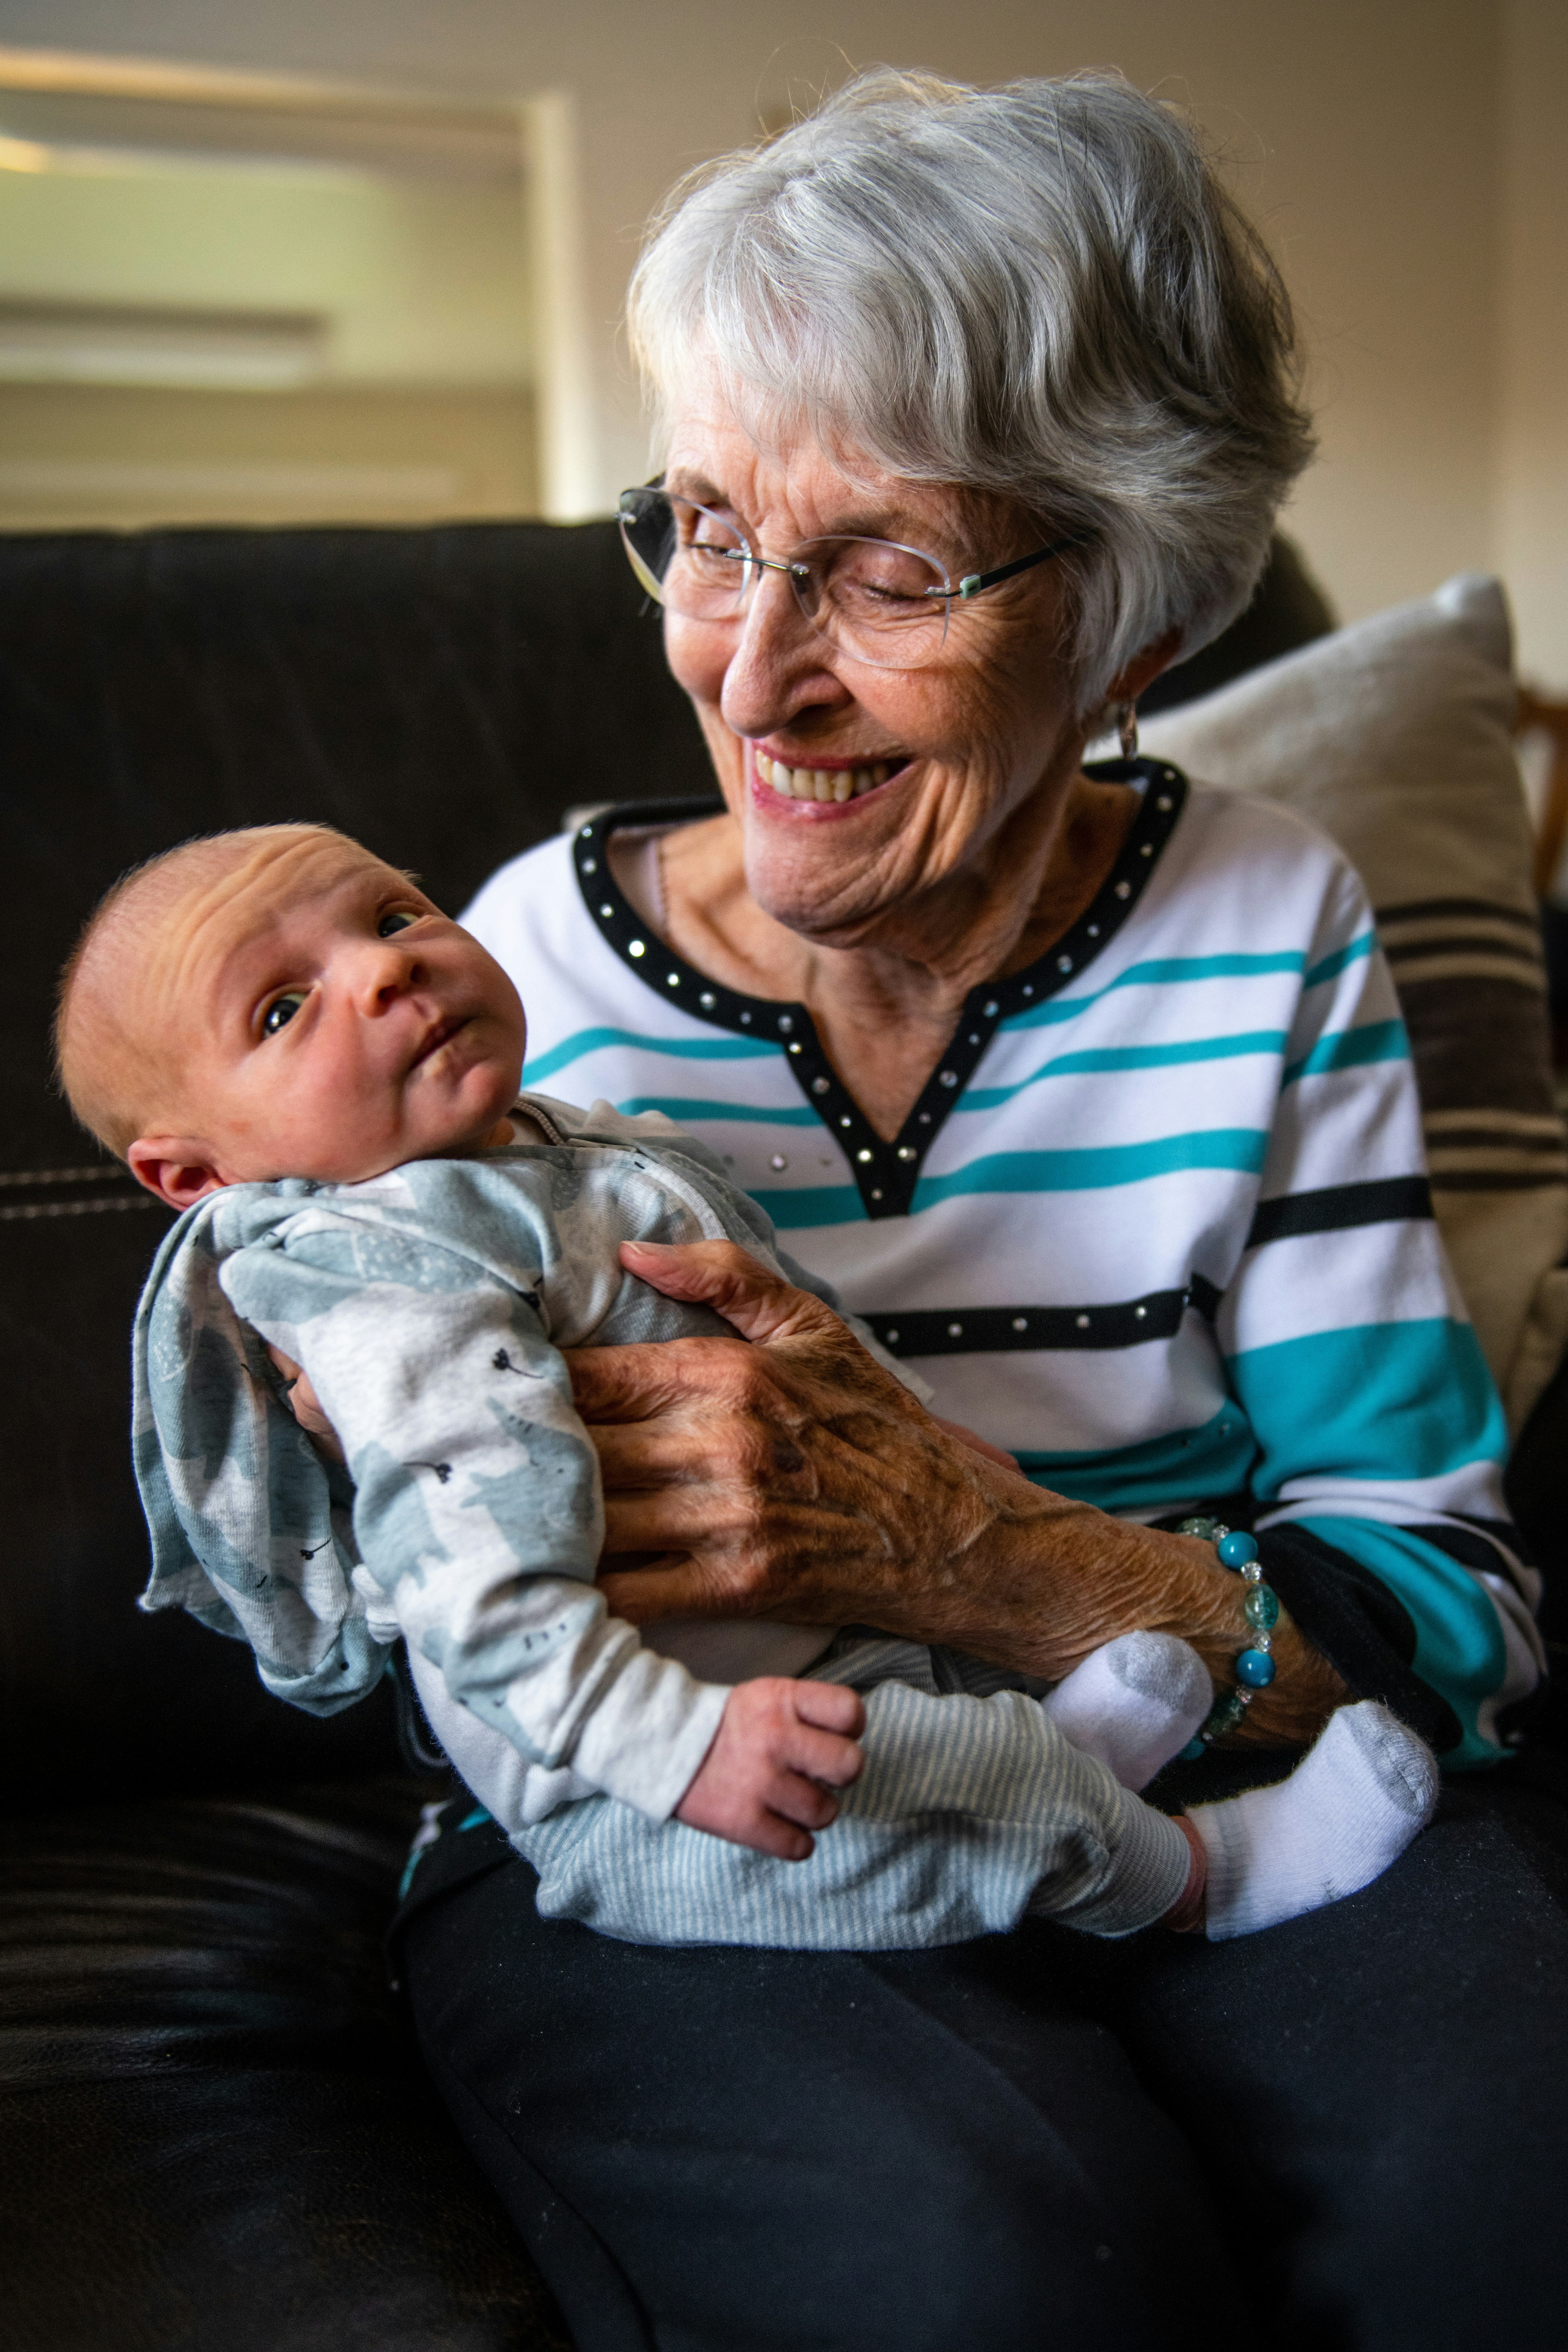 Older person holding a baby